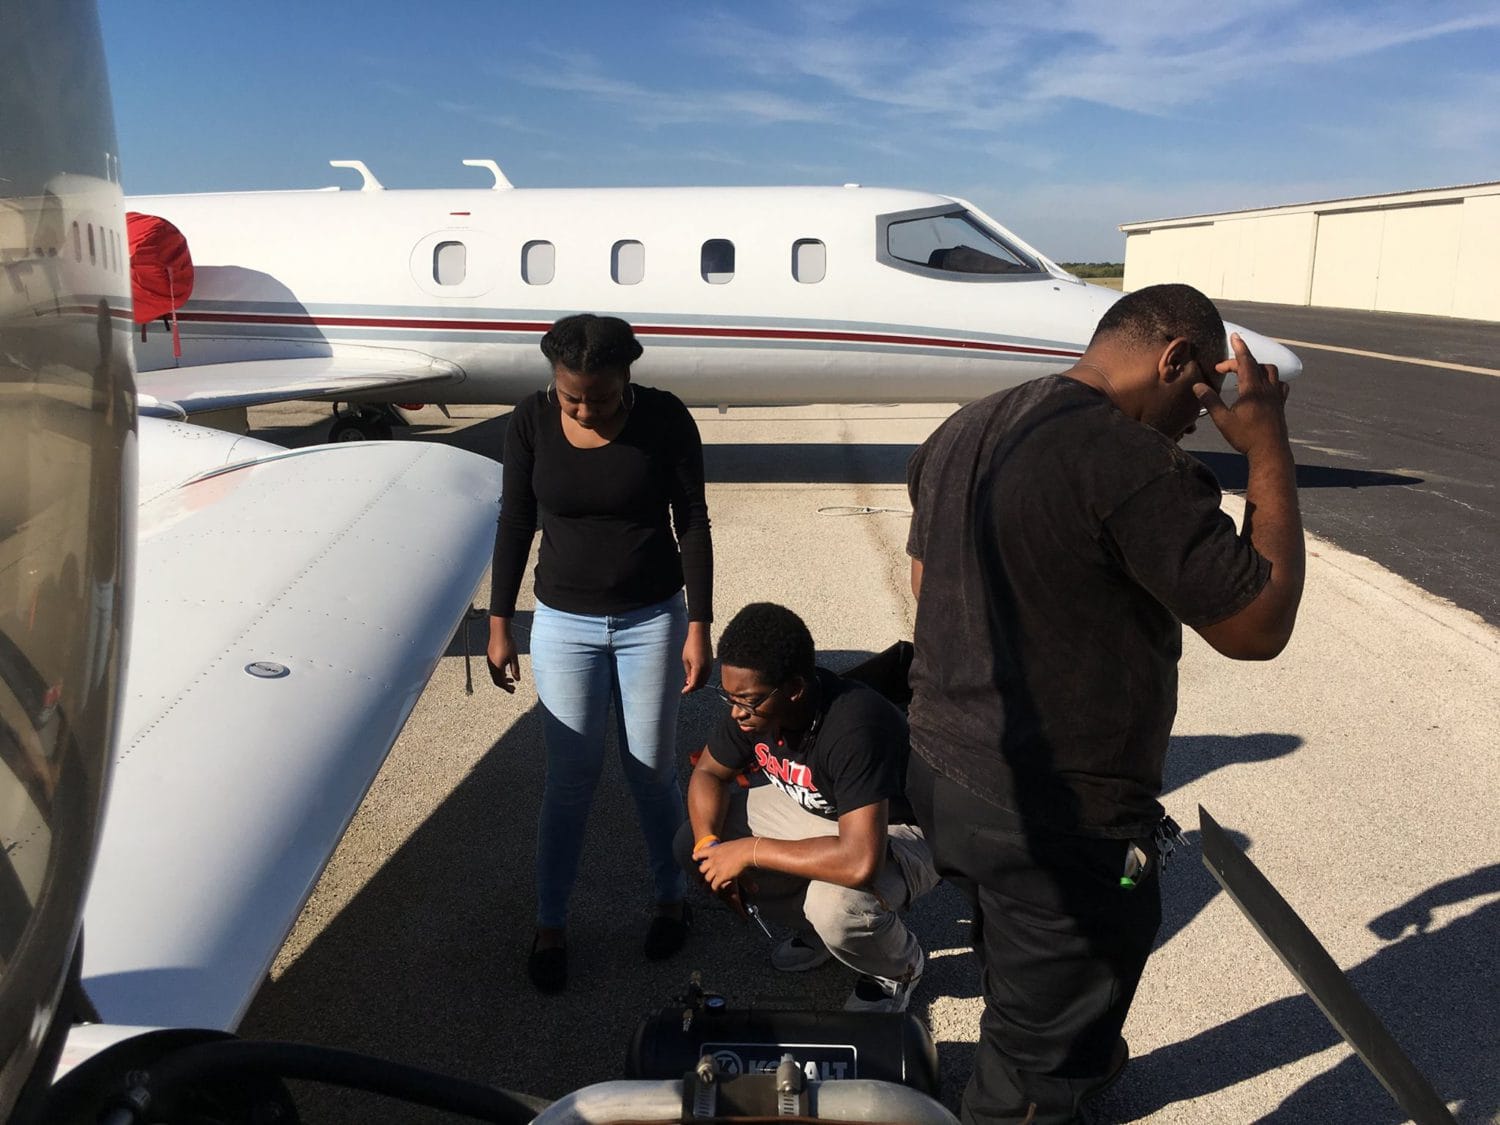 Under the supervision of their avionics instructor, DeSoto students went through the preflight checklist on an actual aircraft.